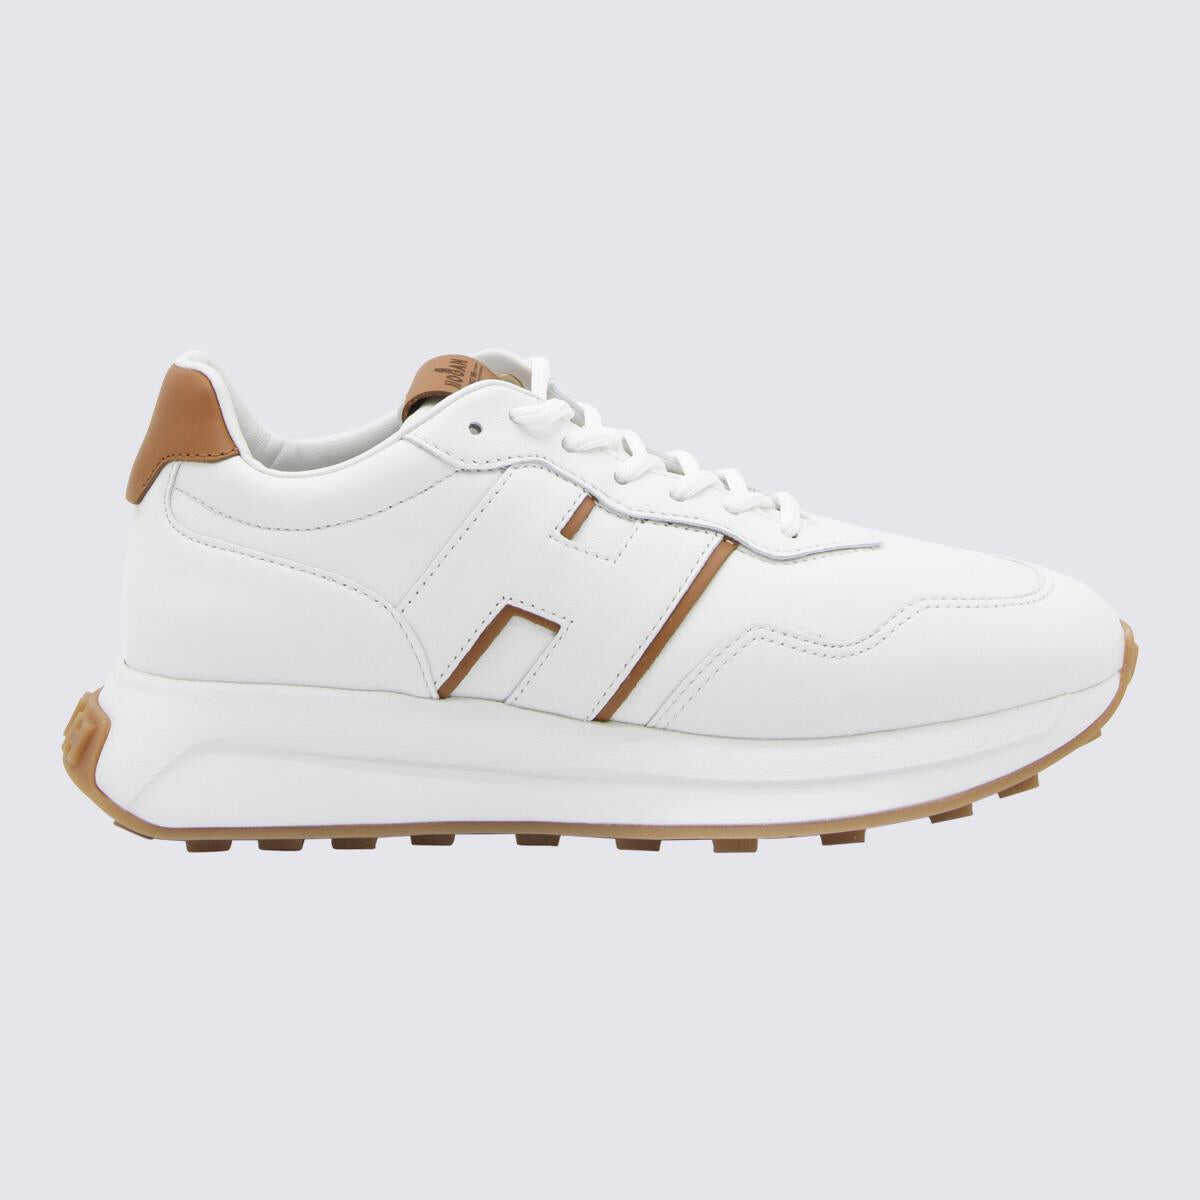 Hogan HOGAN WHITE AND BROWN LEATHER H641 SNEAKERS BIANCO/MARRONE